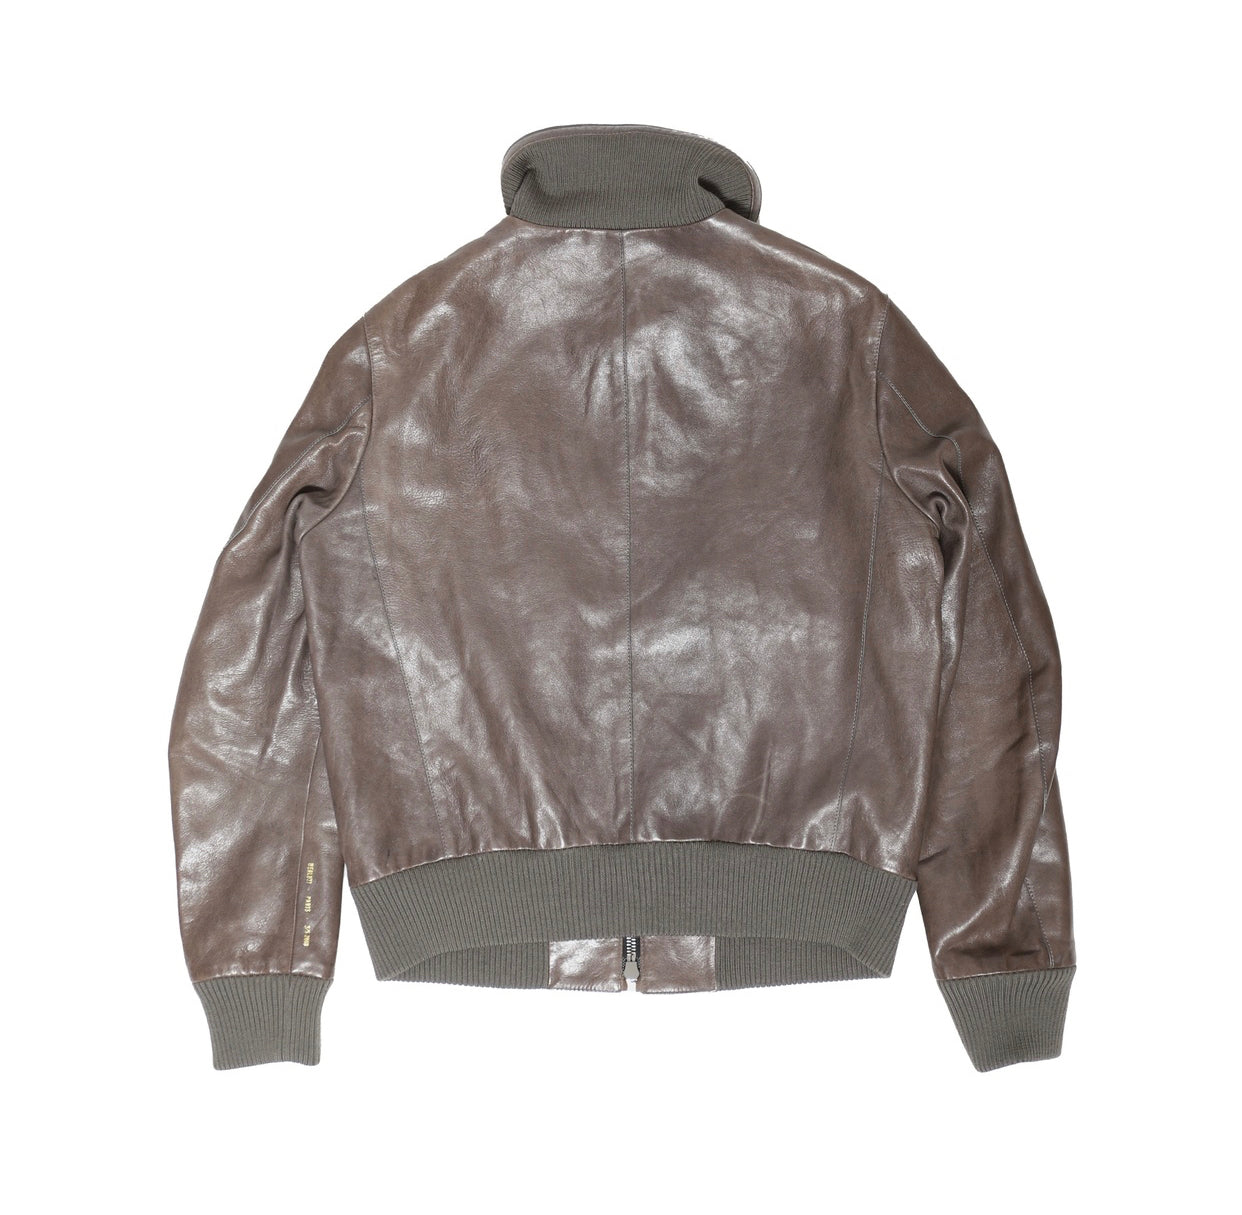 Berluti by Haider Ackermann SS18 Brown High Neck Leather Bomber